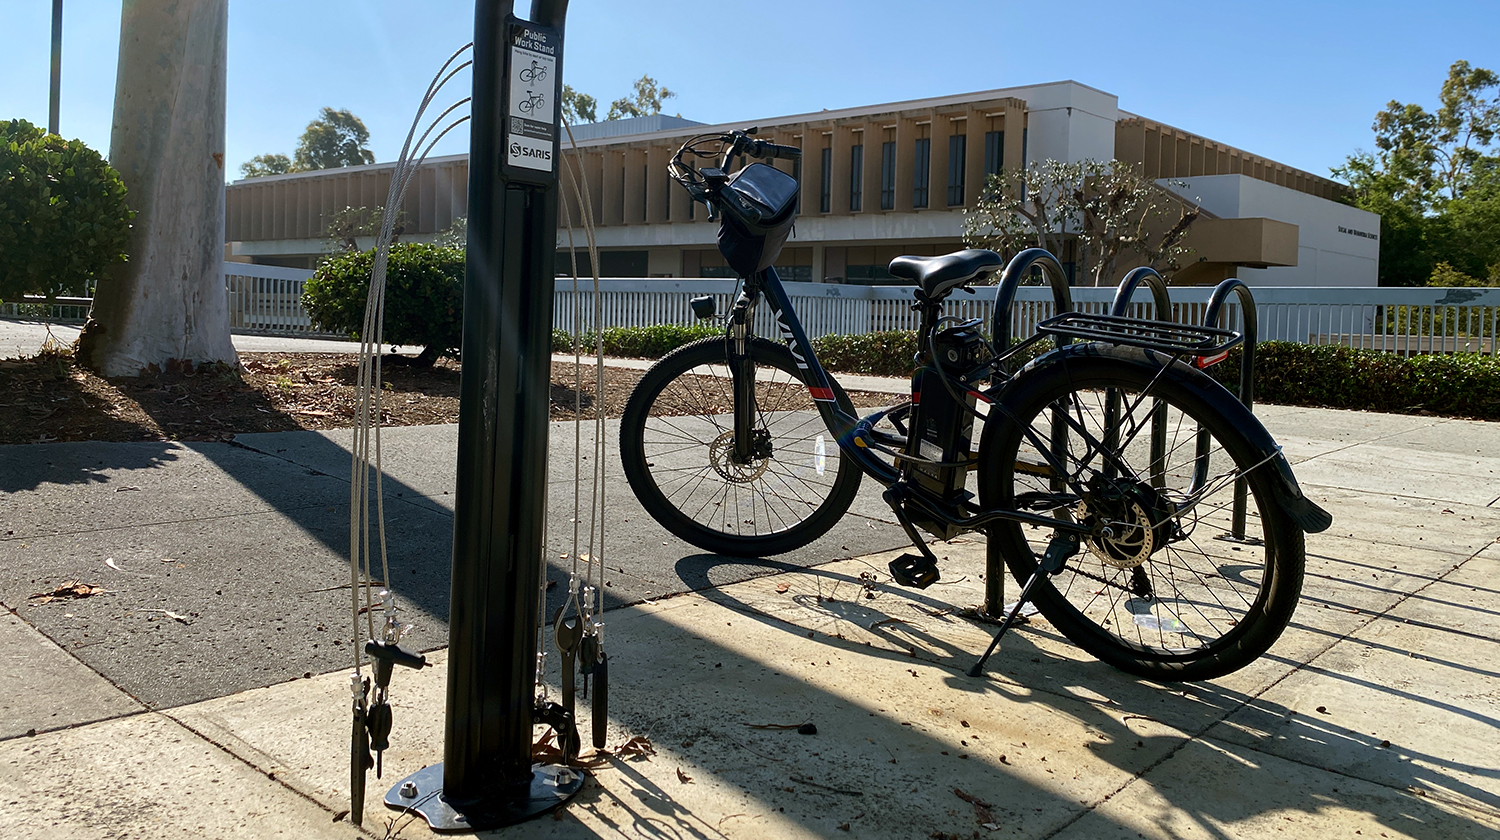 Bike repair station with bike parked in background